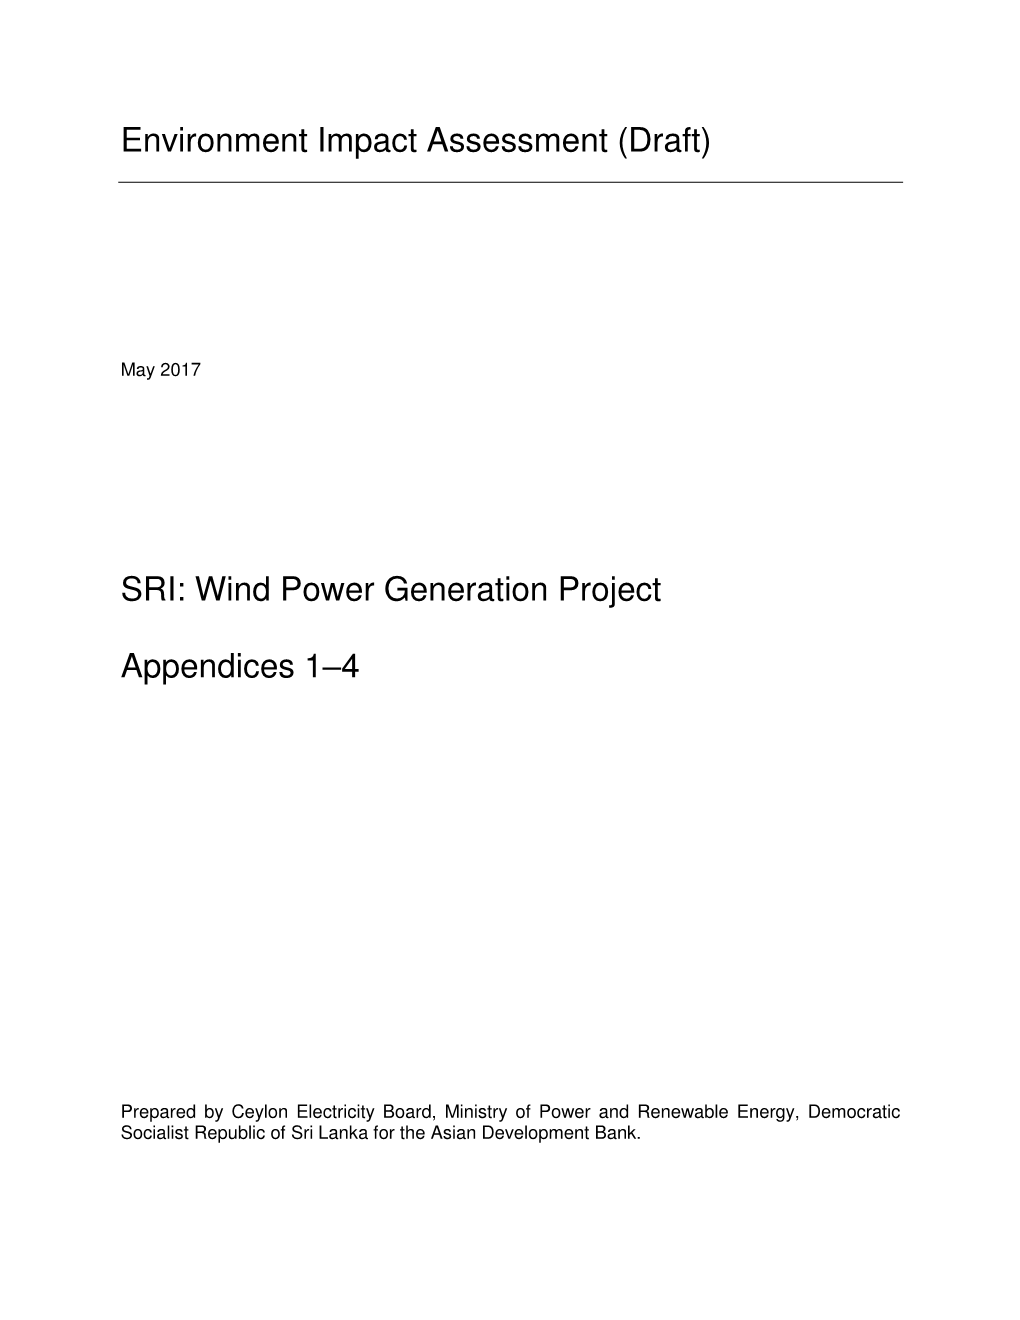 Wind Power Generation Project Appendices